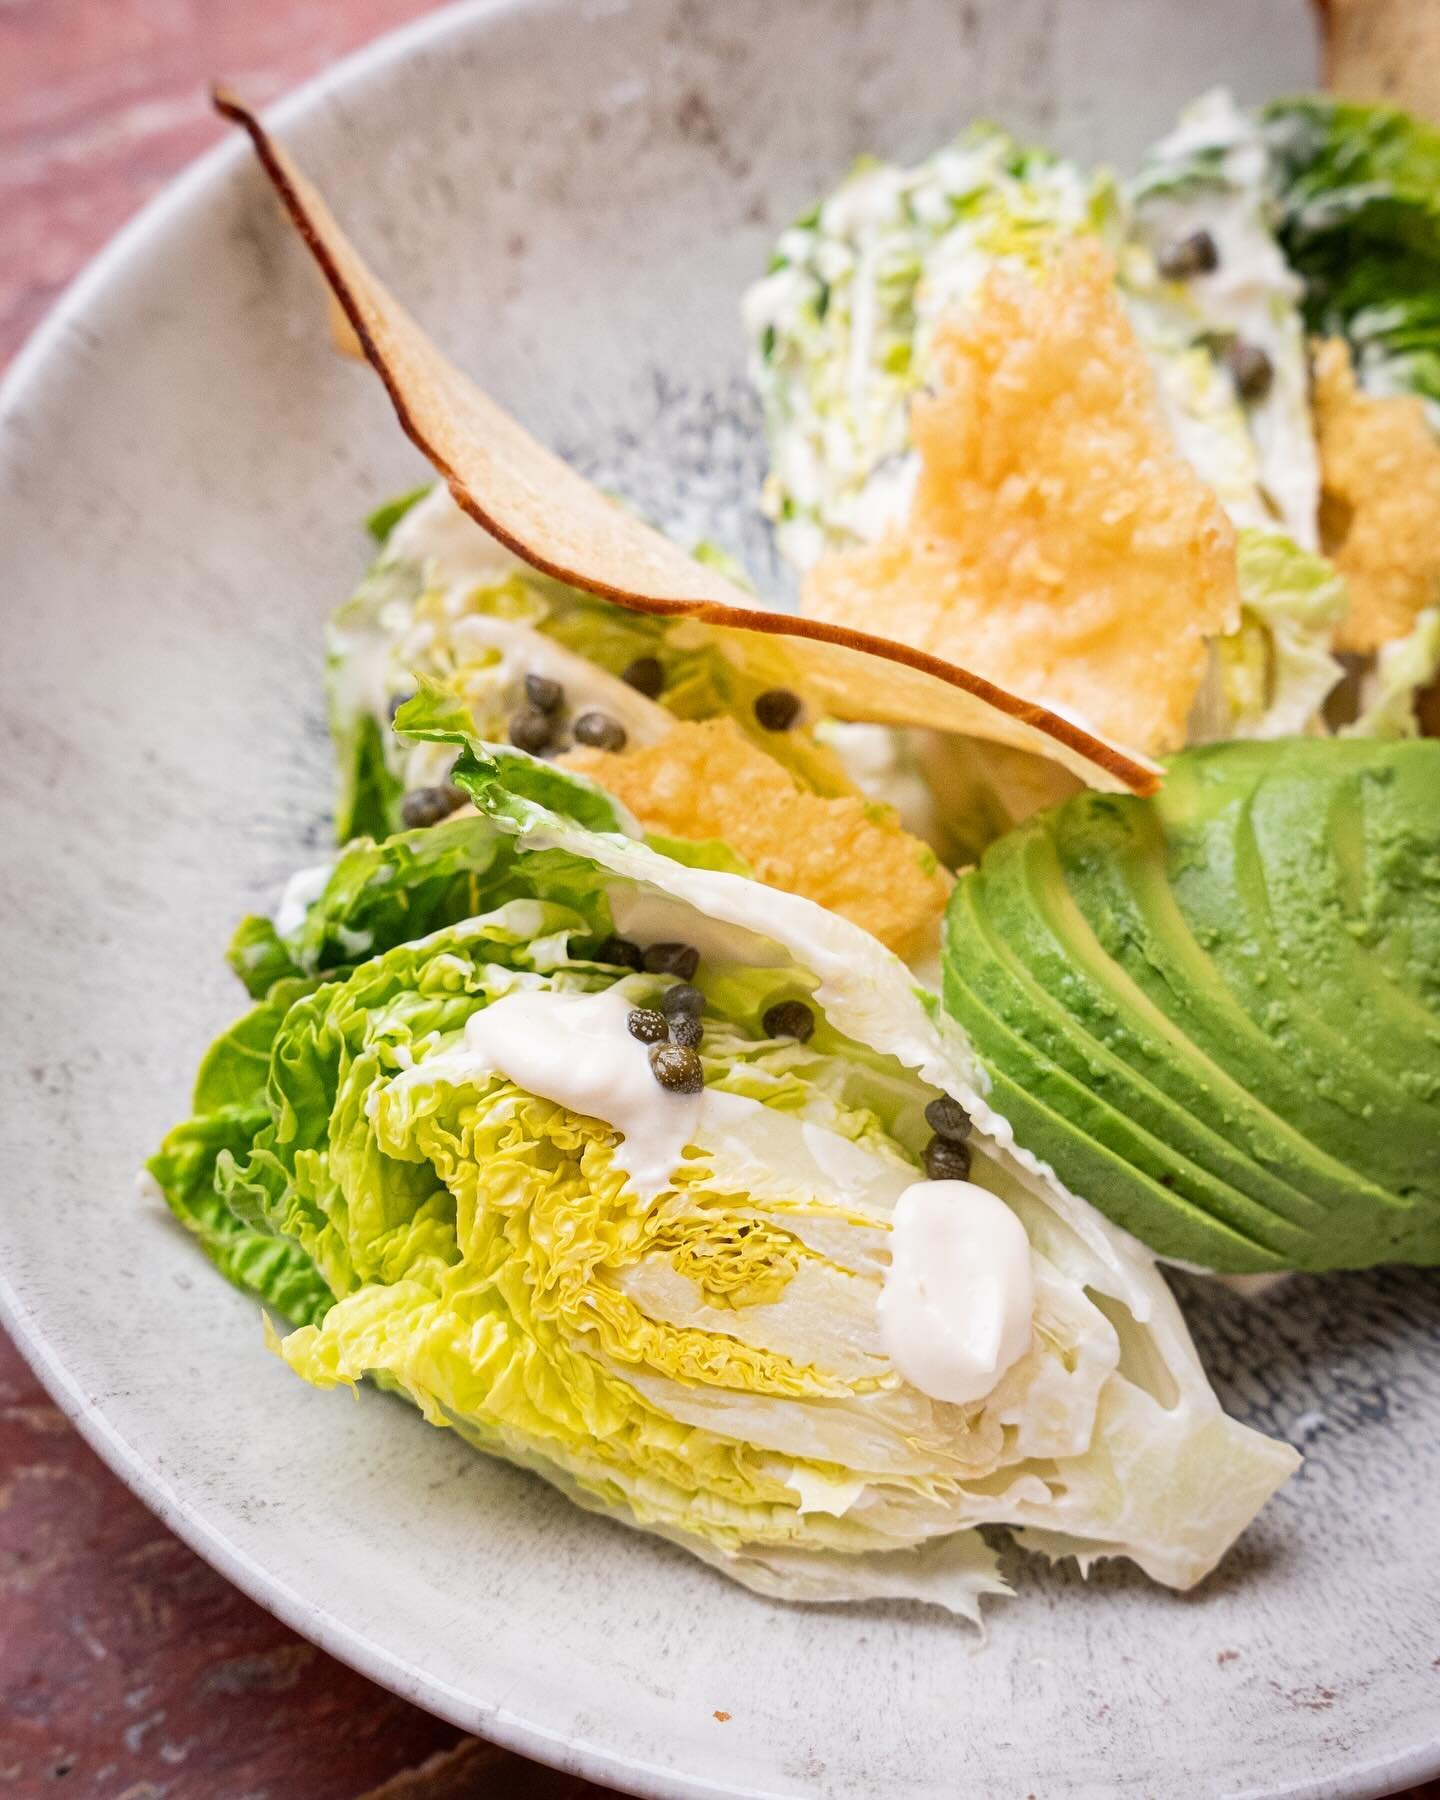 Crisp baby gem lettuce with crunchy homemade croutons, our creamy parmesan dressing, capers, avocado and a soft-boiled egg. This classic Caesar Salad can be enjoyed with or without grilled chicken and we recommend adding a side of truffled triple coo